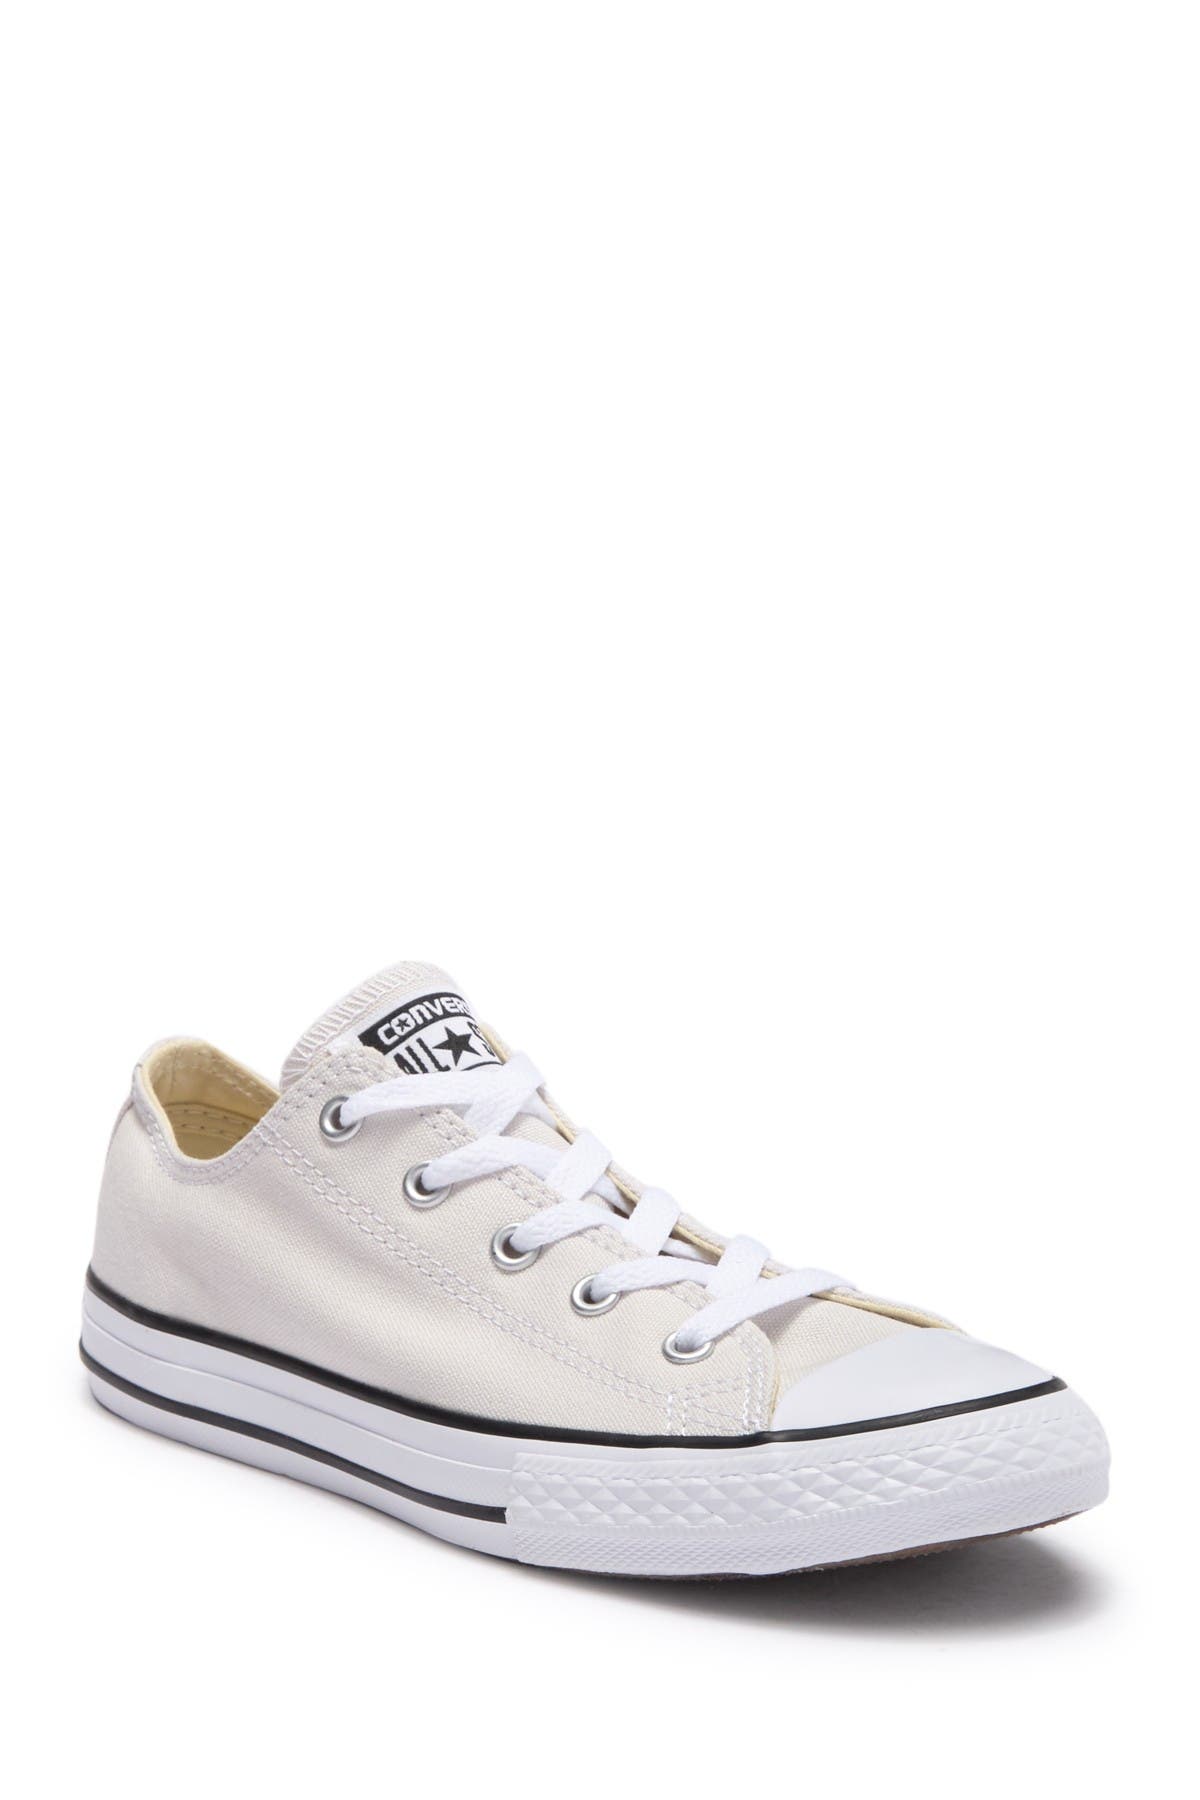 Chuck Taylor All Star Pale Putty Oxford 